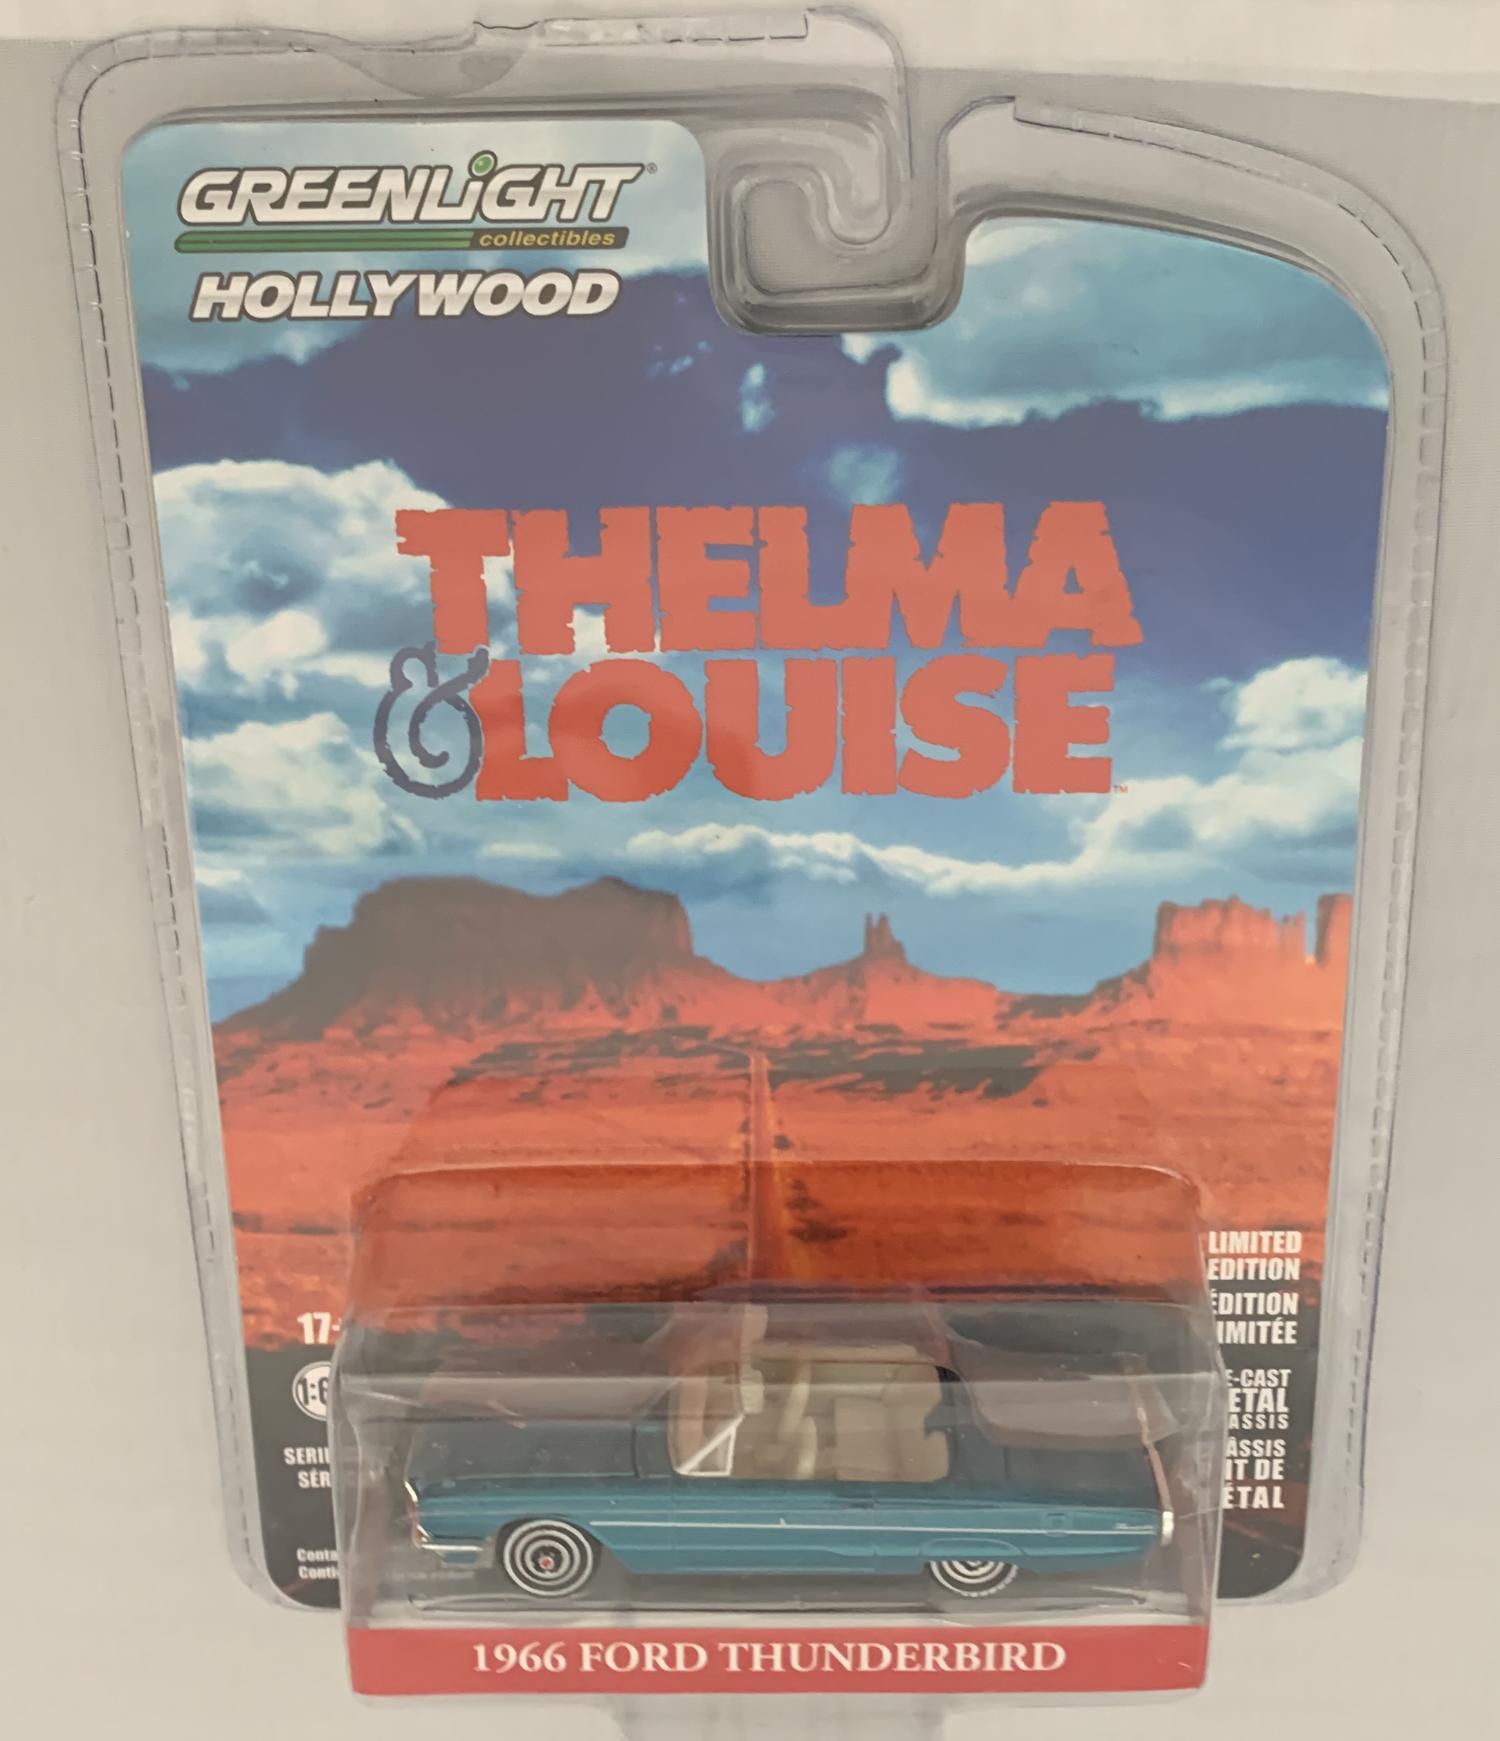 Thelma & Louise 1966 Ford Thunderbird Convertible with roof down in turquoise 1:64 scale model from Greenlight , limited edition model